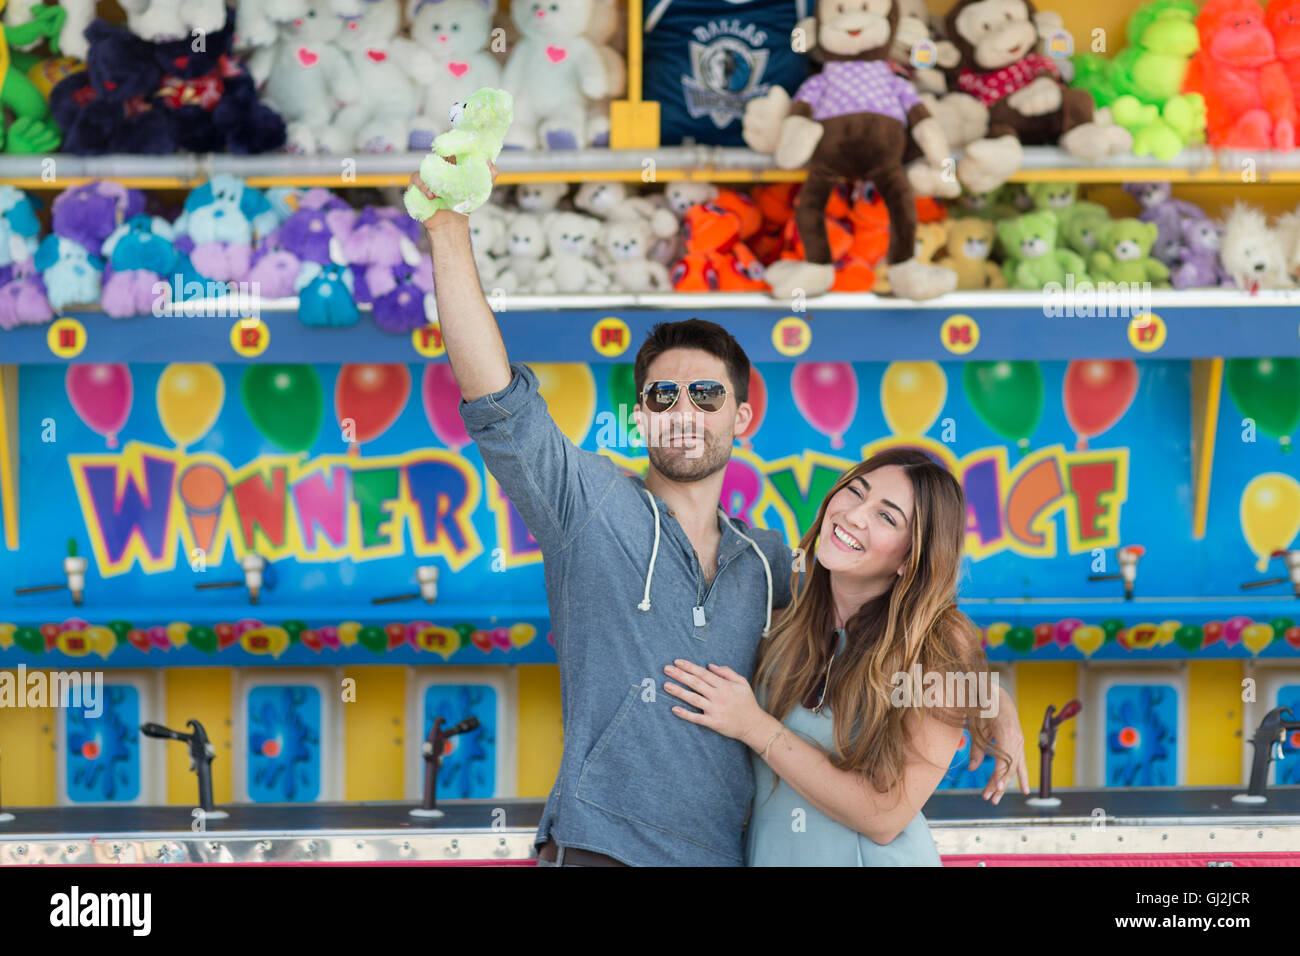 Couple in front of fairground shooting gallery holding teddy bear, Coney island, Brooklyn, New York, USA Stock Photo